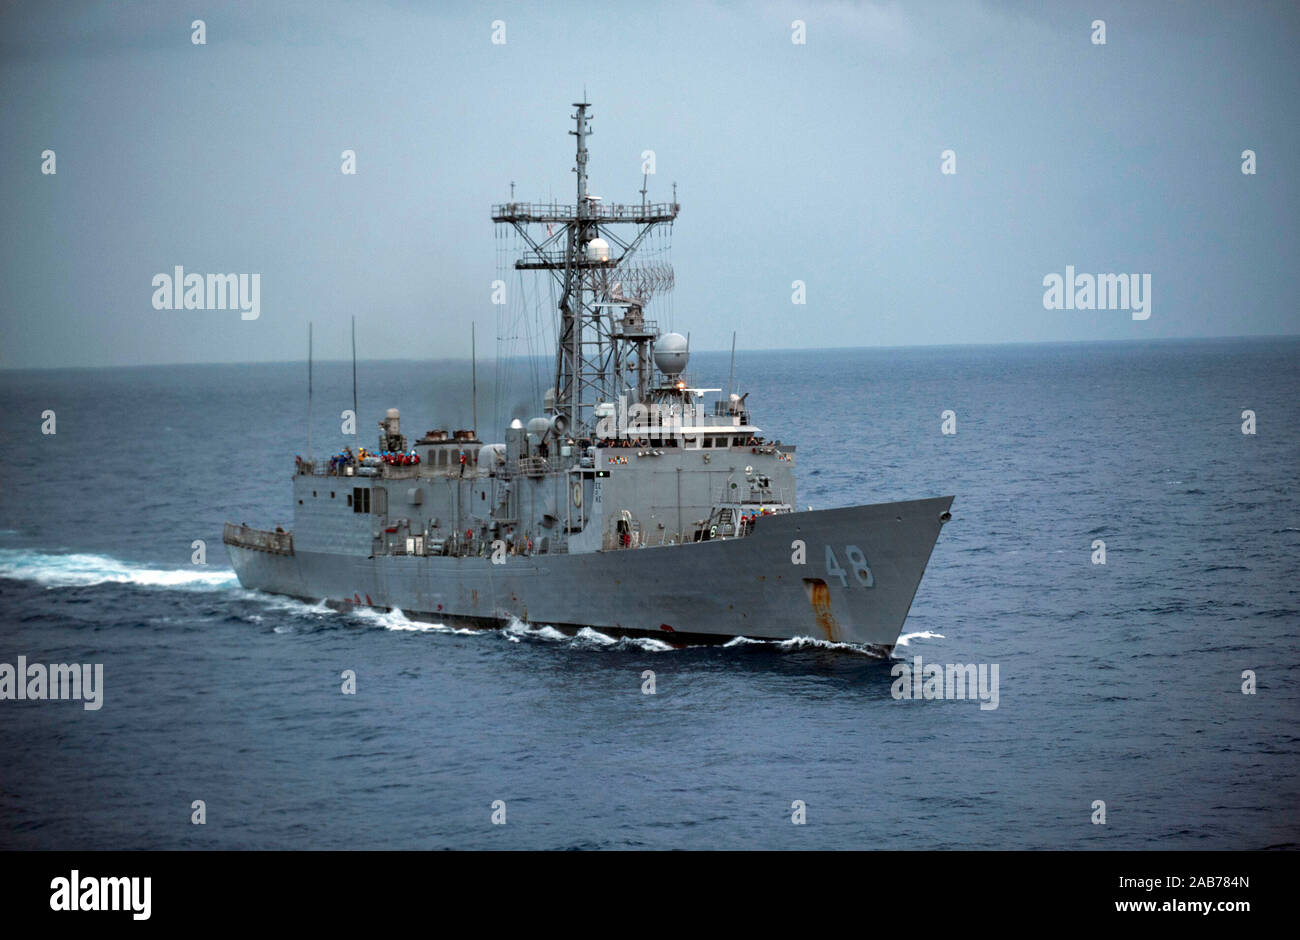 SOUTH CHINA SEA (Oct. 15, 2012) The Oliver Hazard Perry-class frigate USS Vandegrift (FFG 48) is underway in the South China Sea. Stock Photo